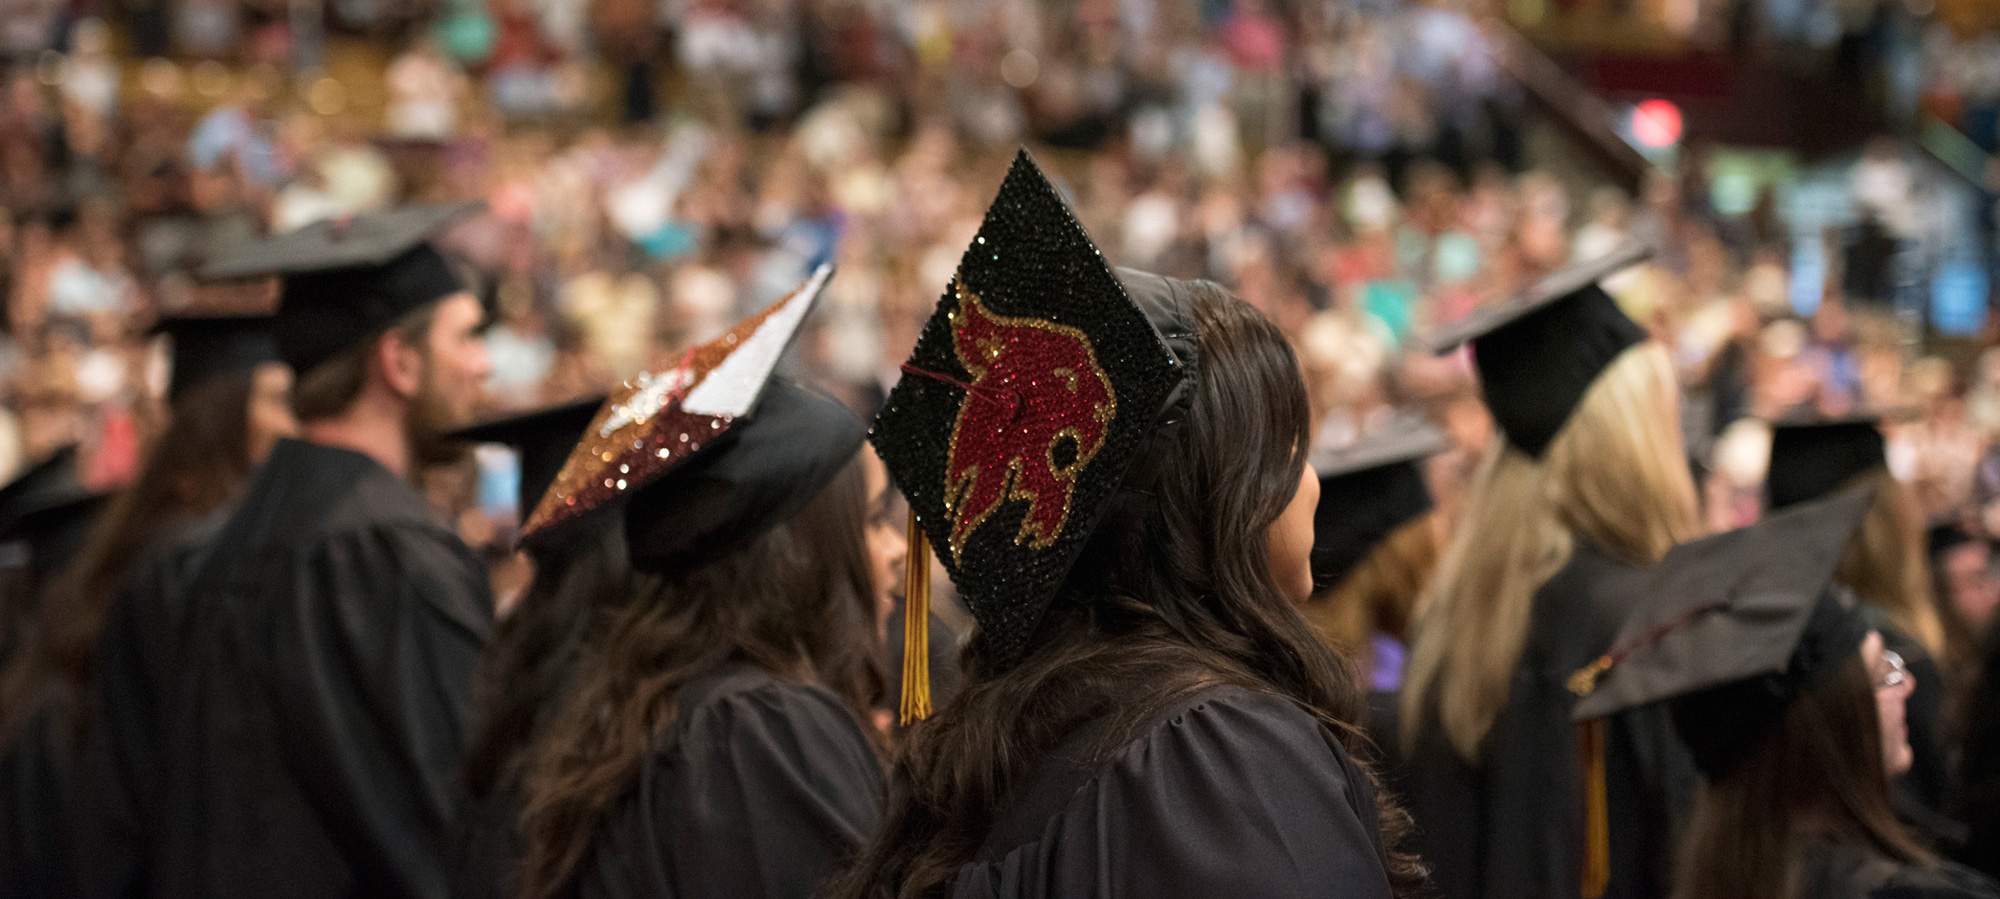 A picture of Texas State University graduation cap at the graduation ceremony